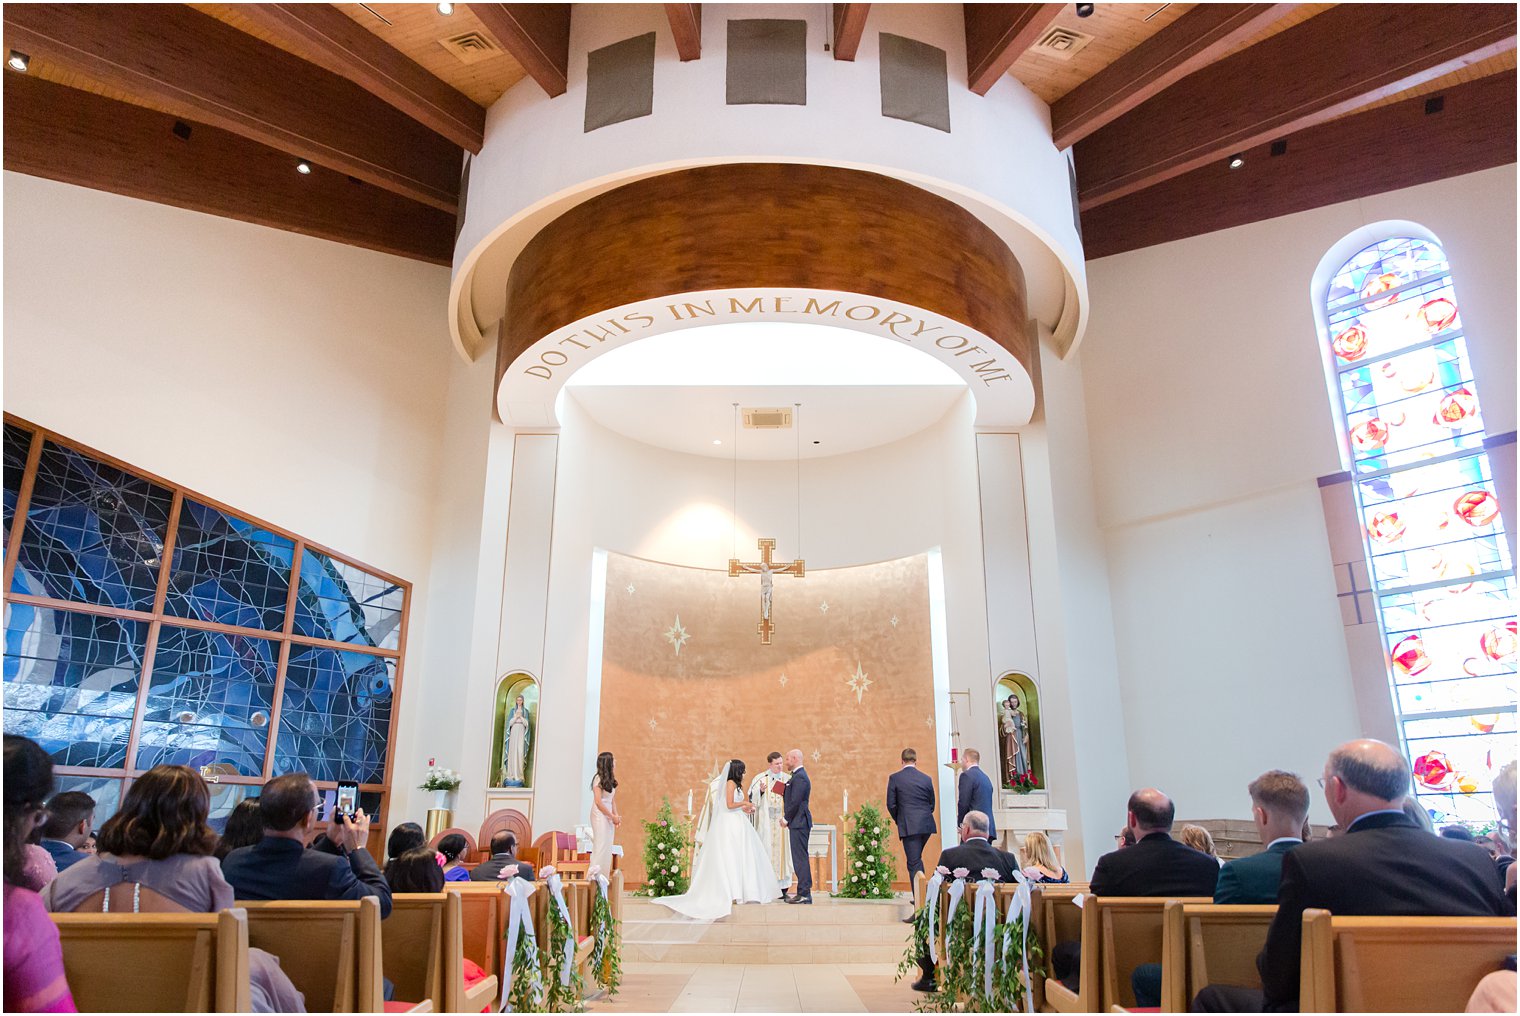 Wedding ceremony at St. Gregory the Great in Hamilton, NJ